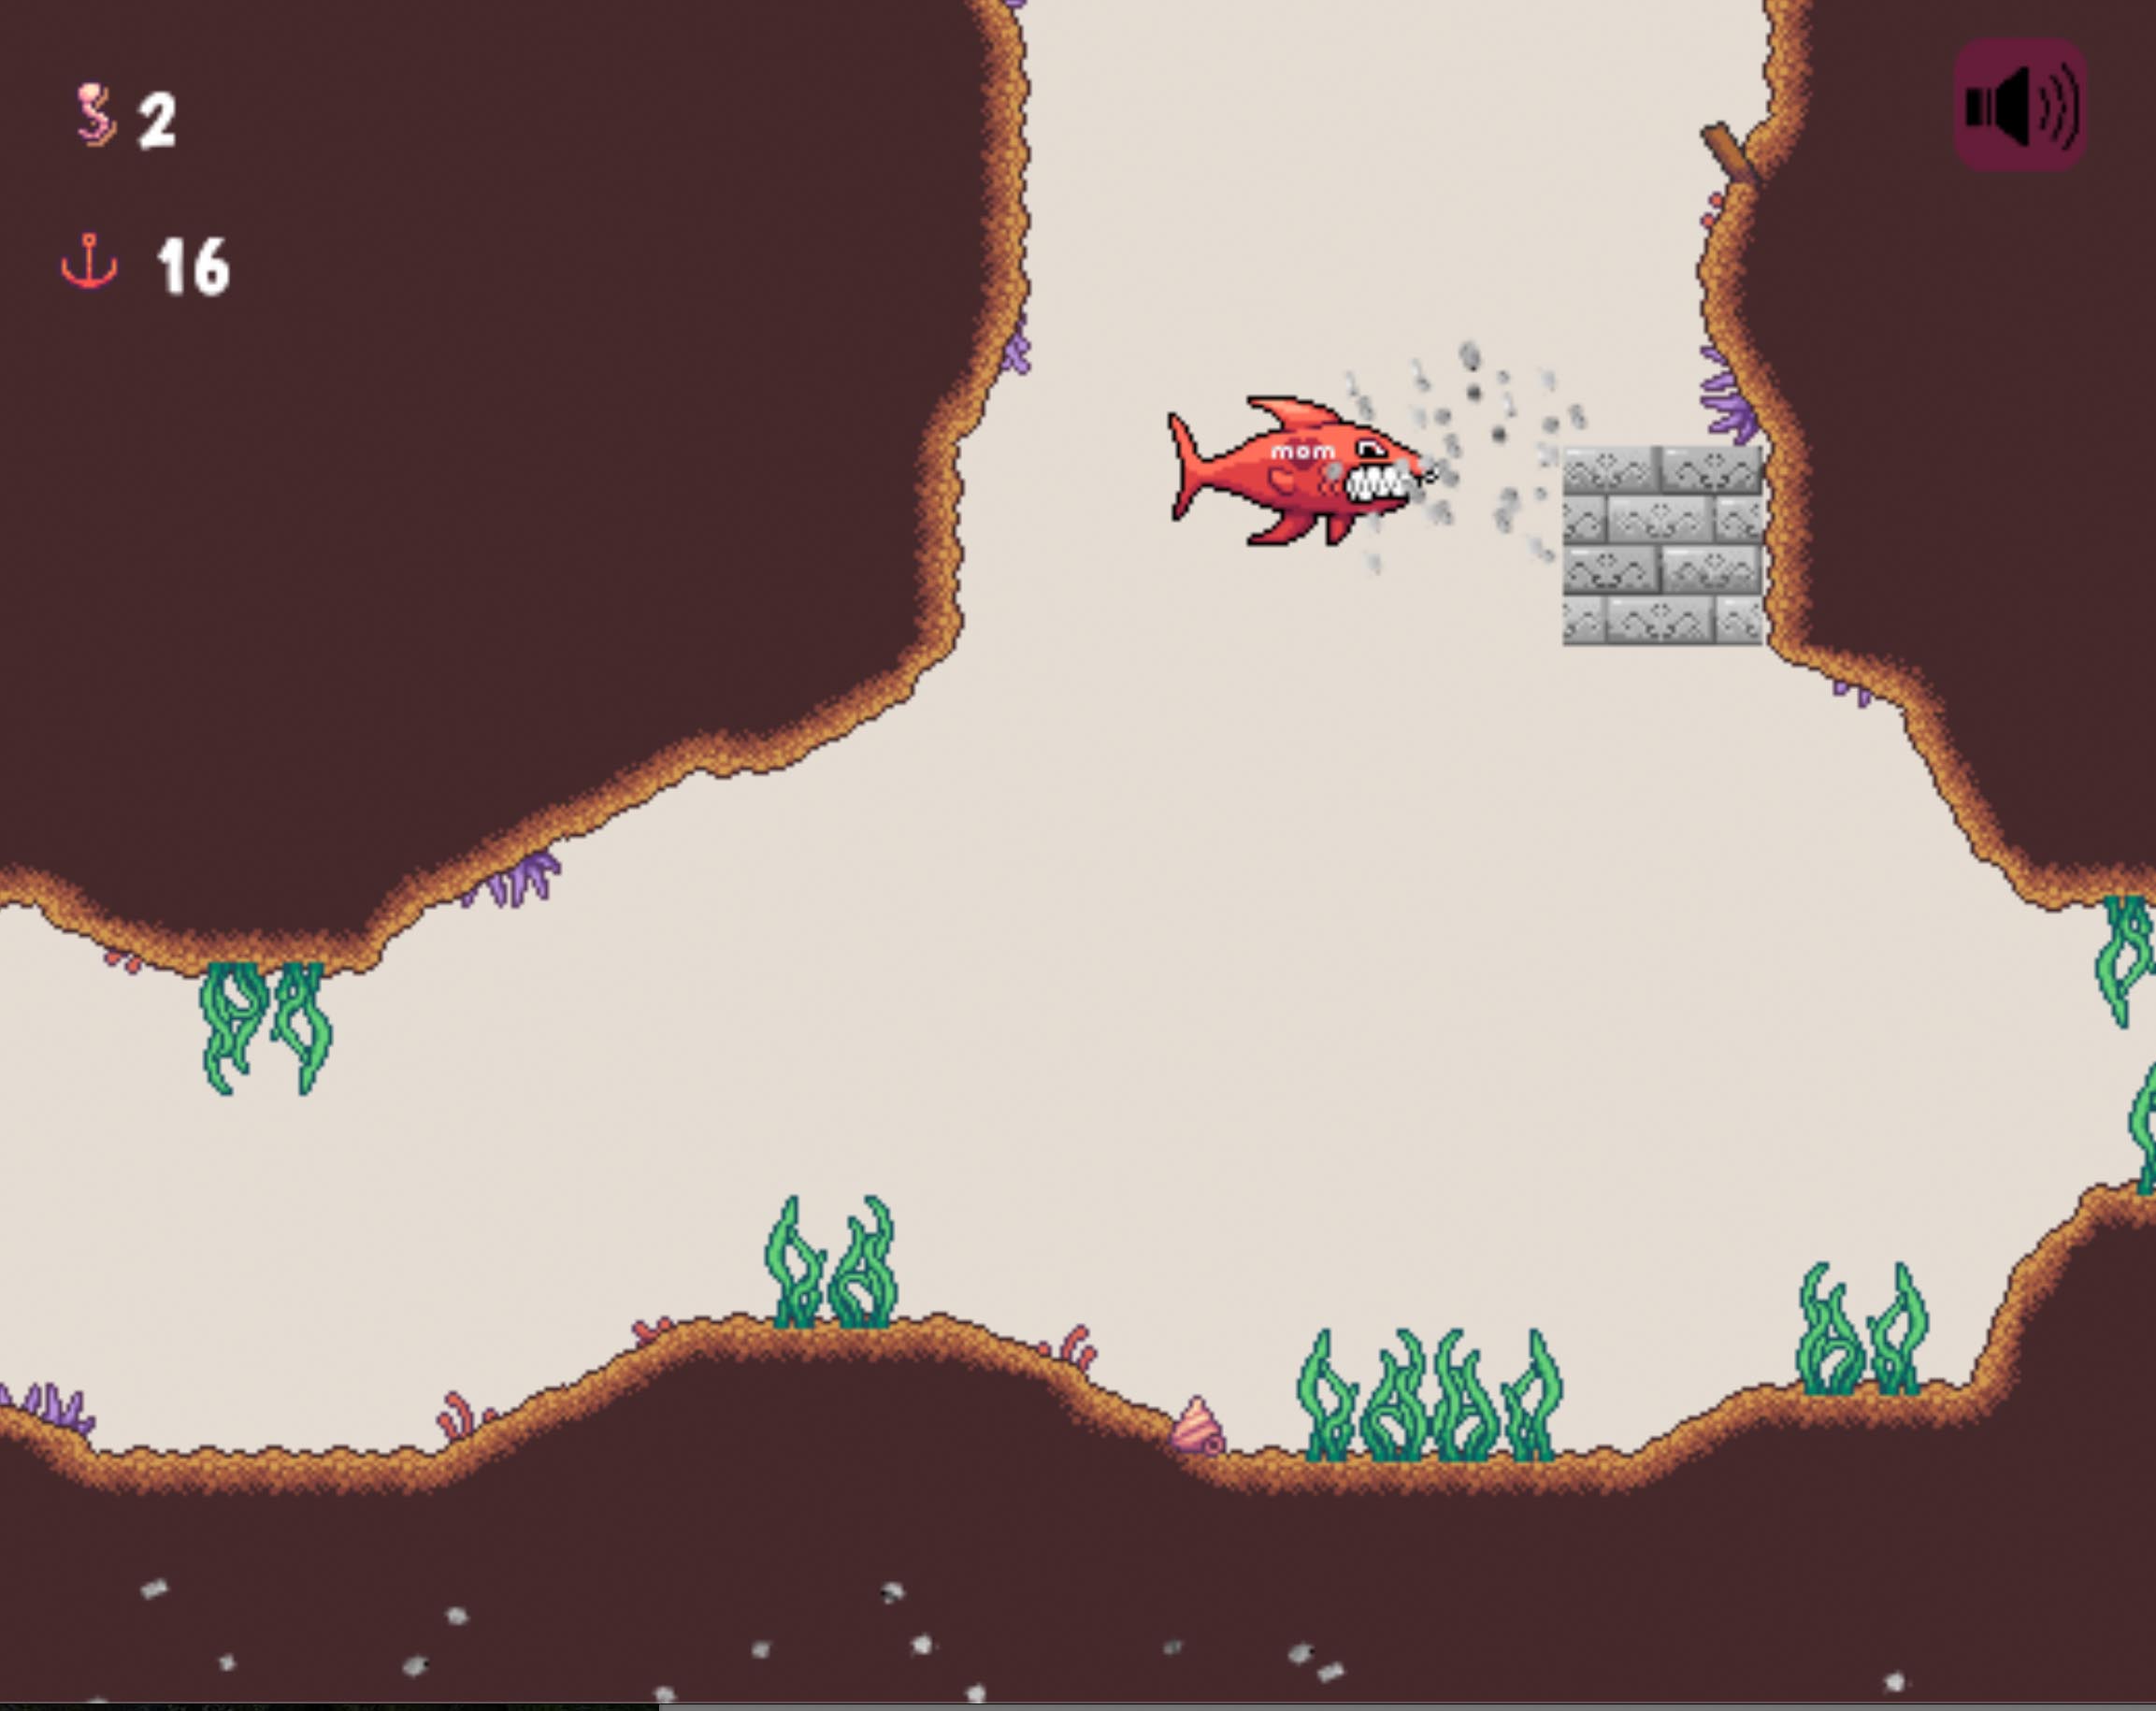 This is a screenshot from Genre Piranha. The player has transformed into a large fish and is breaking through bricks.